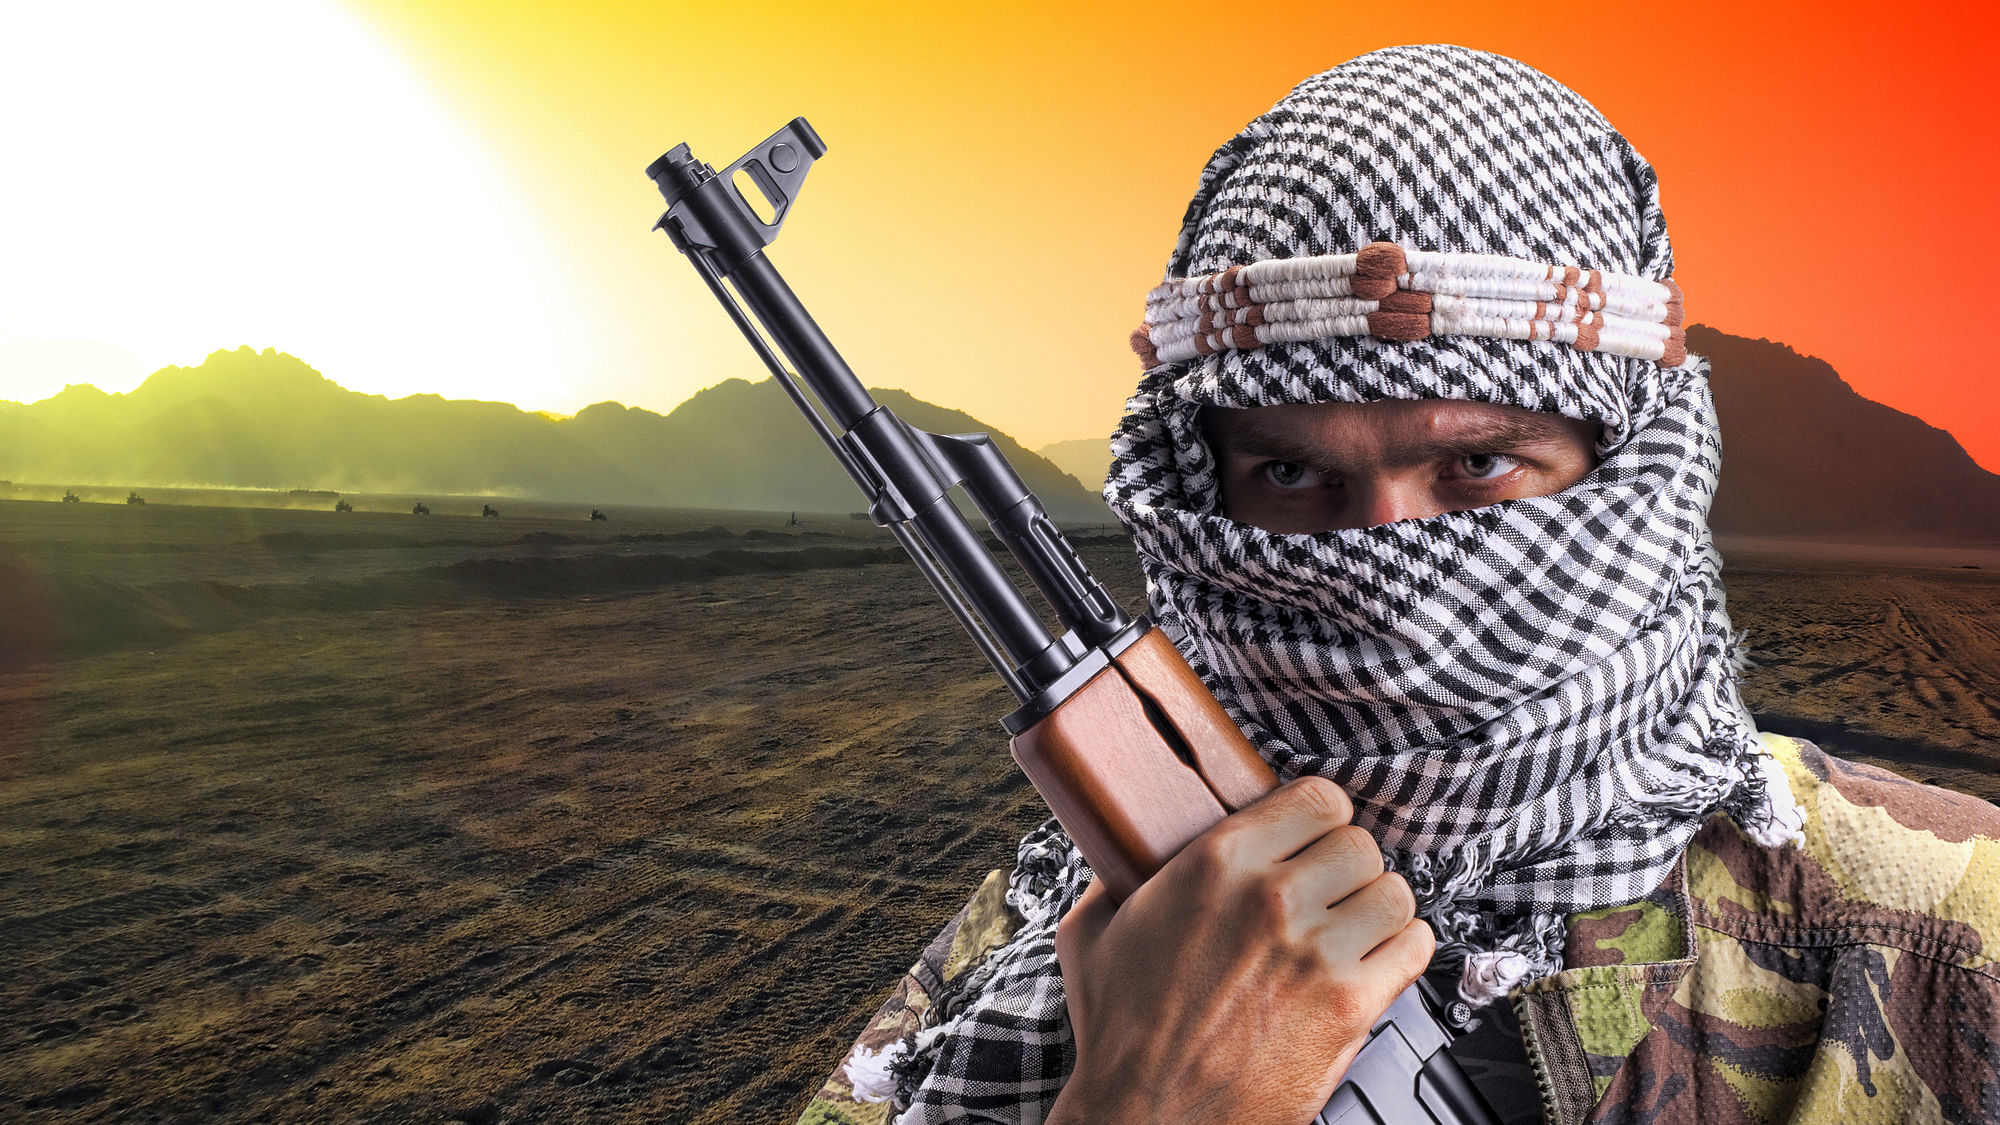 Al-Qaeda in Indian Subcontinent is a regional branch of the global terror network. Photo used for representational purpose. (Photo: iStockphoto)